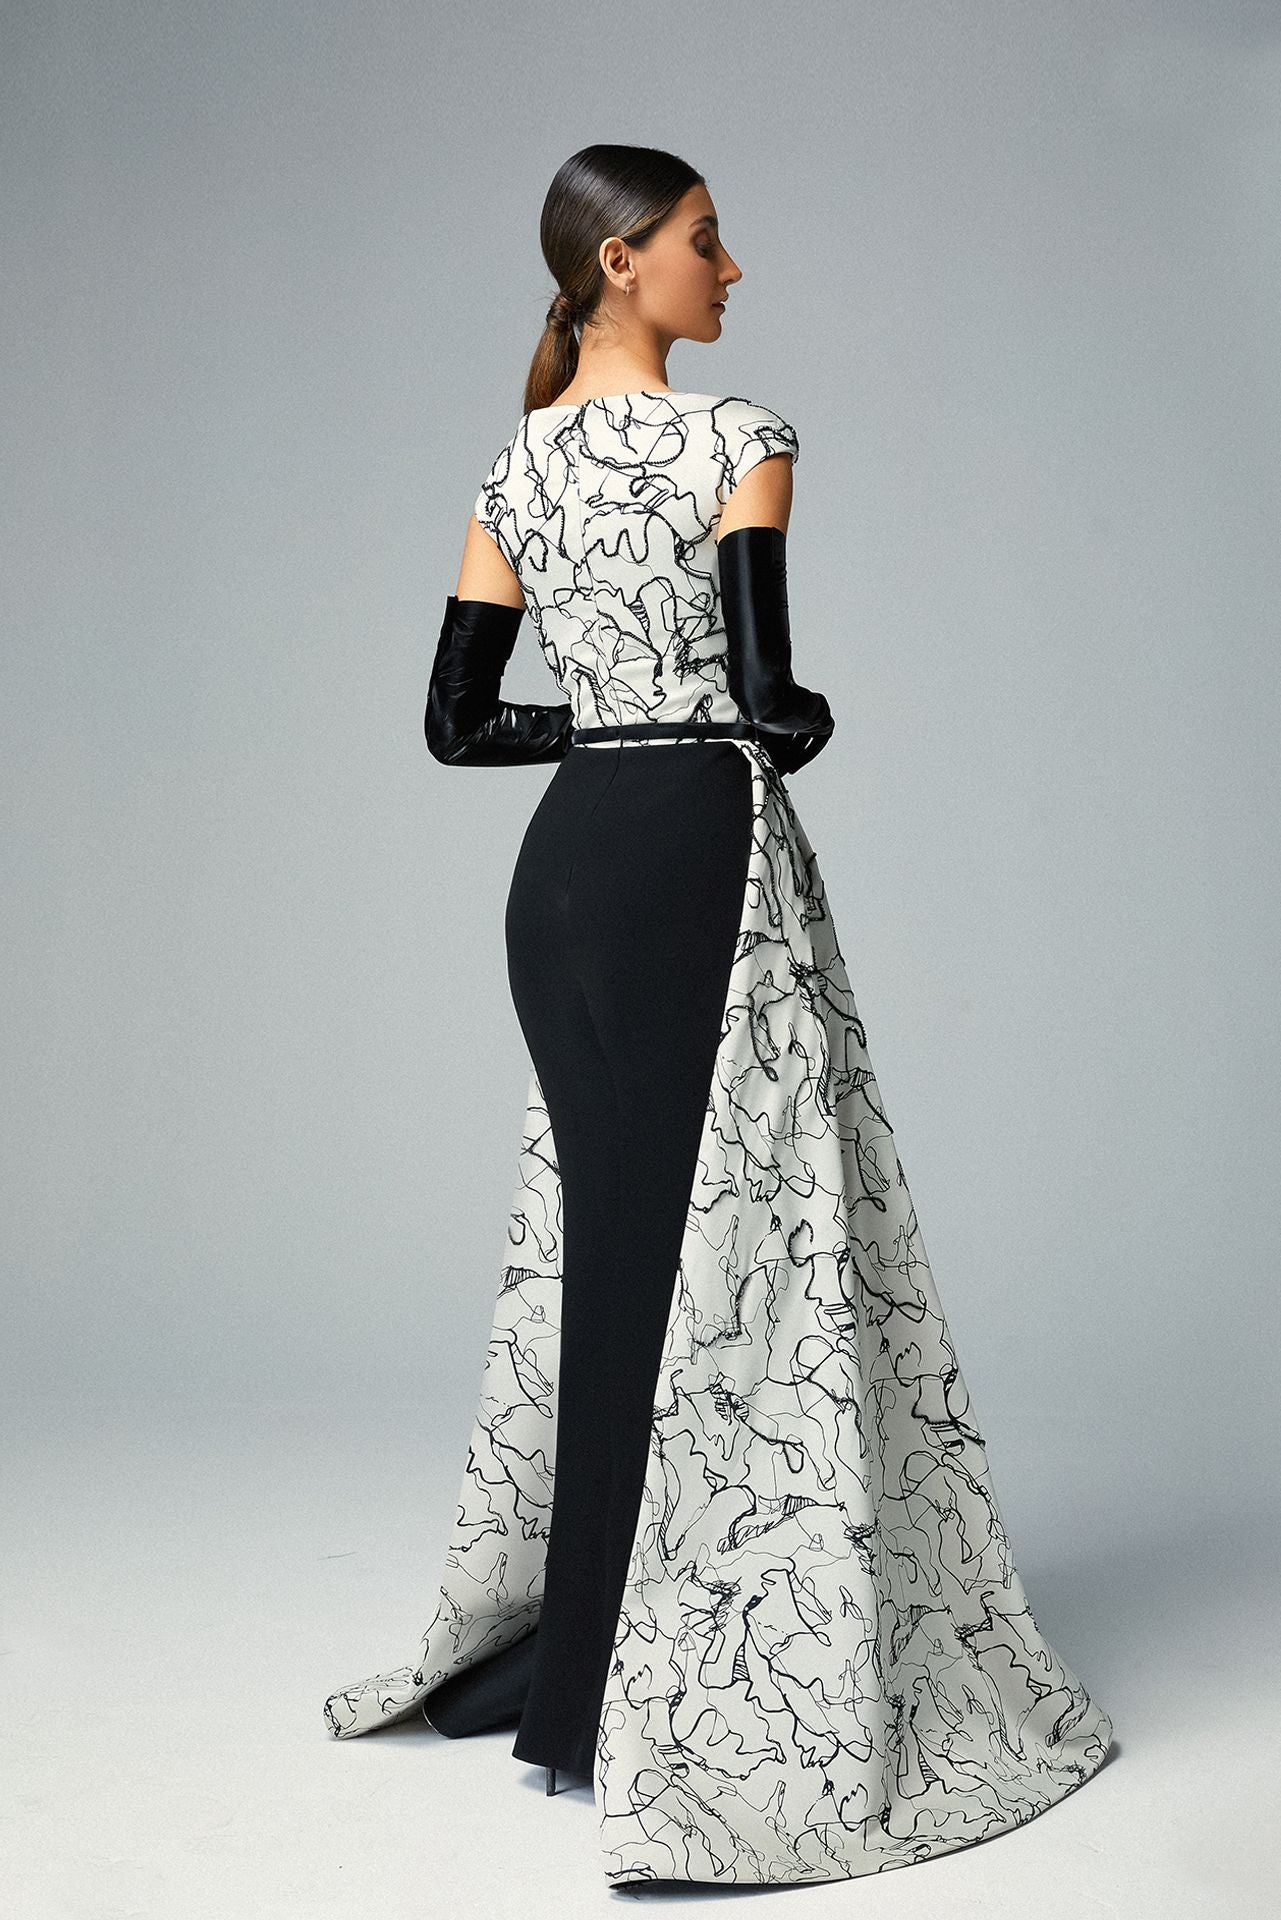 Long Black Evening Dress With Lace Sleeves | seelineonline.com